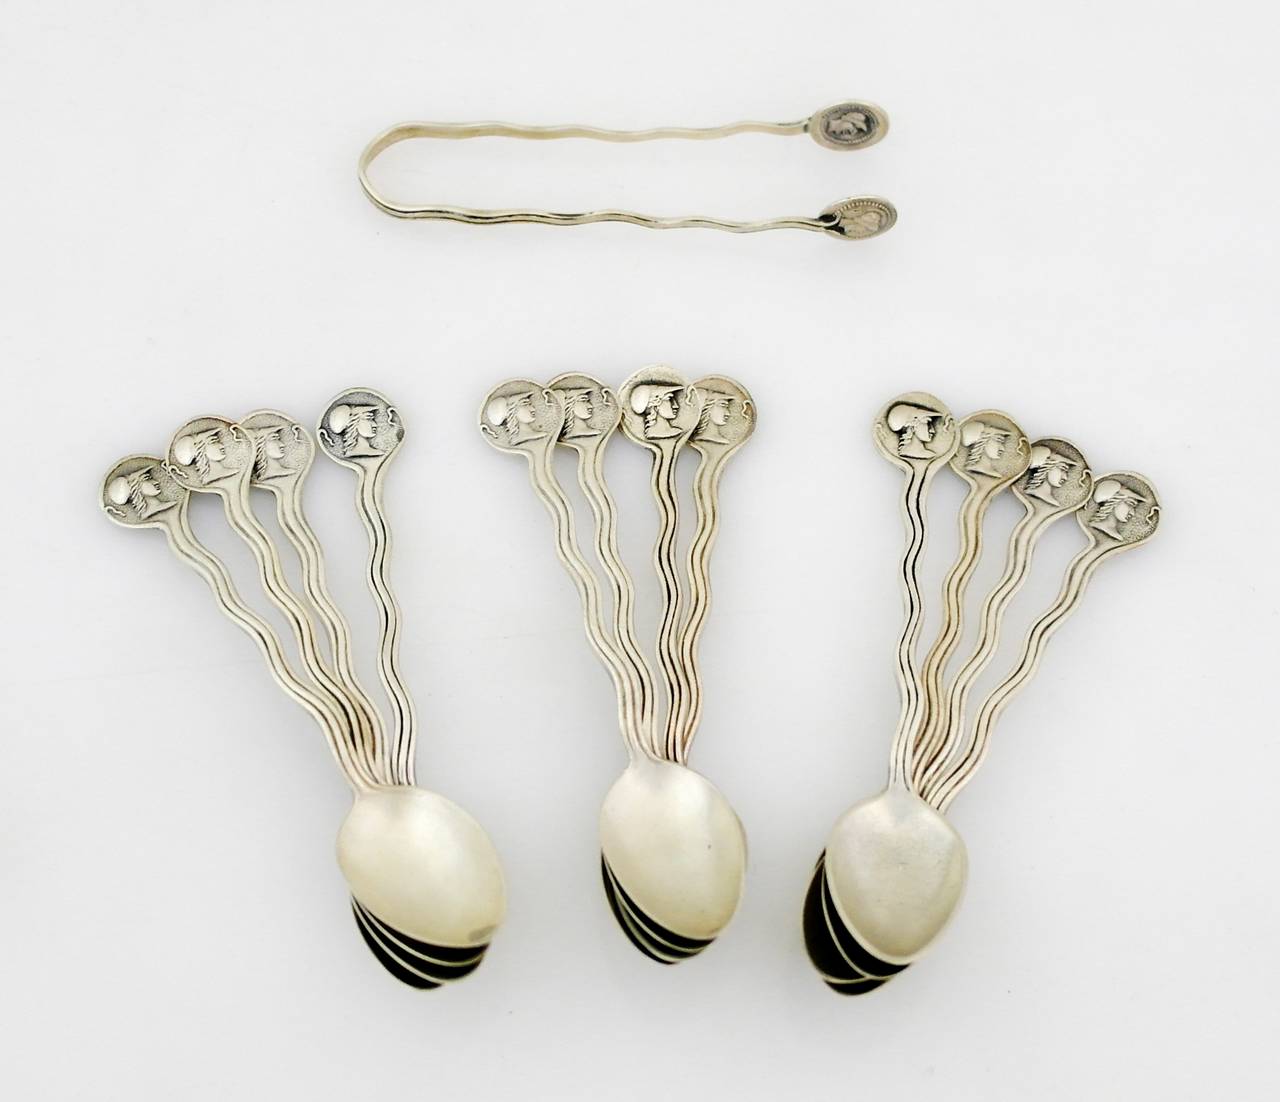 American Gorham Medallion Coin Silver Demitasse Set with 12 Spoons and Sugar Tongs For Sale